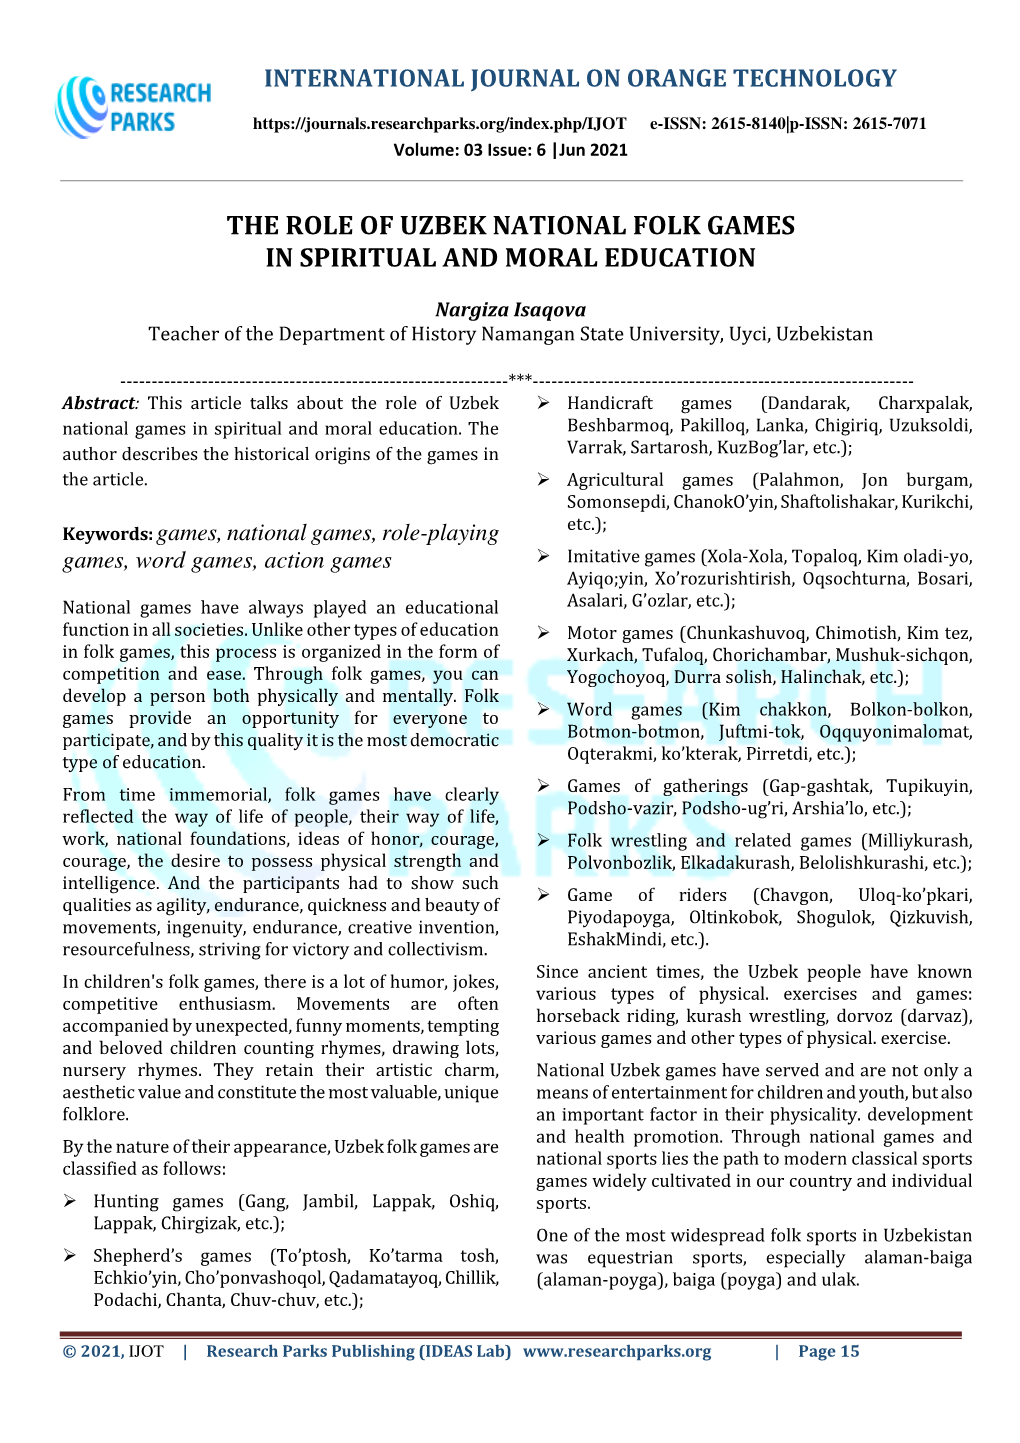 The Role of Uzbek National Folk Games in Spiritual and Moral Education